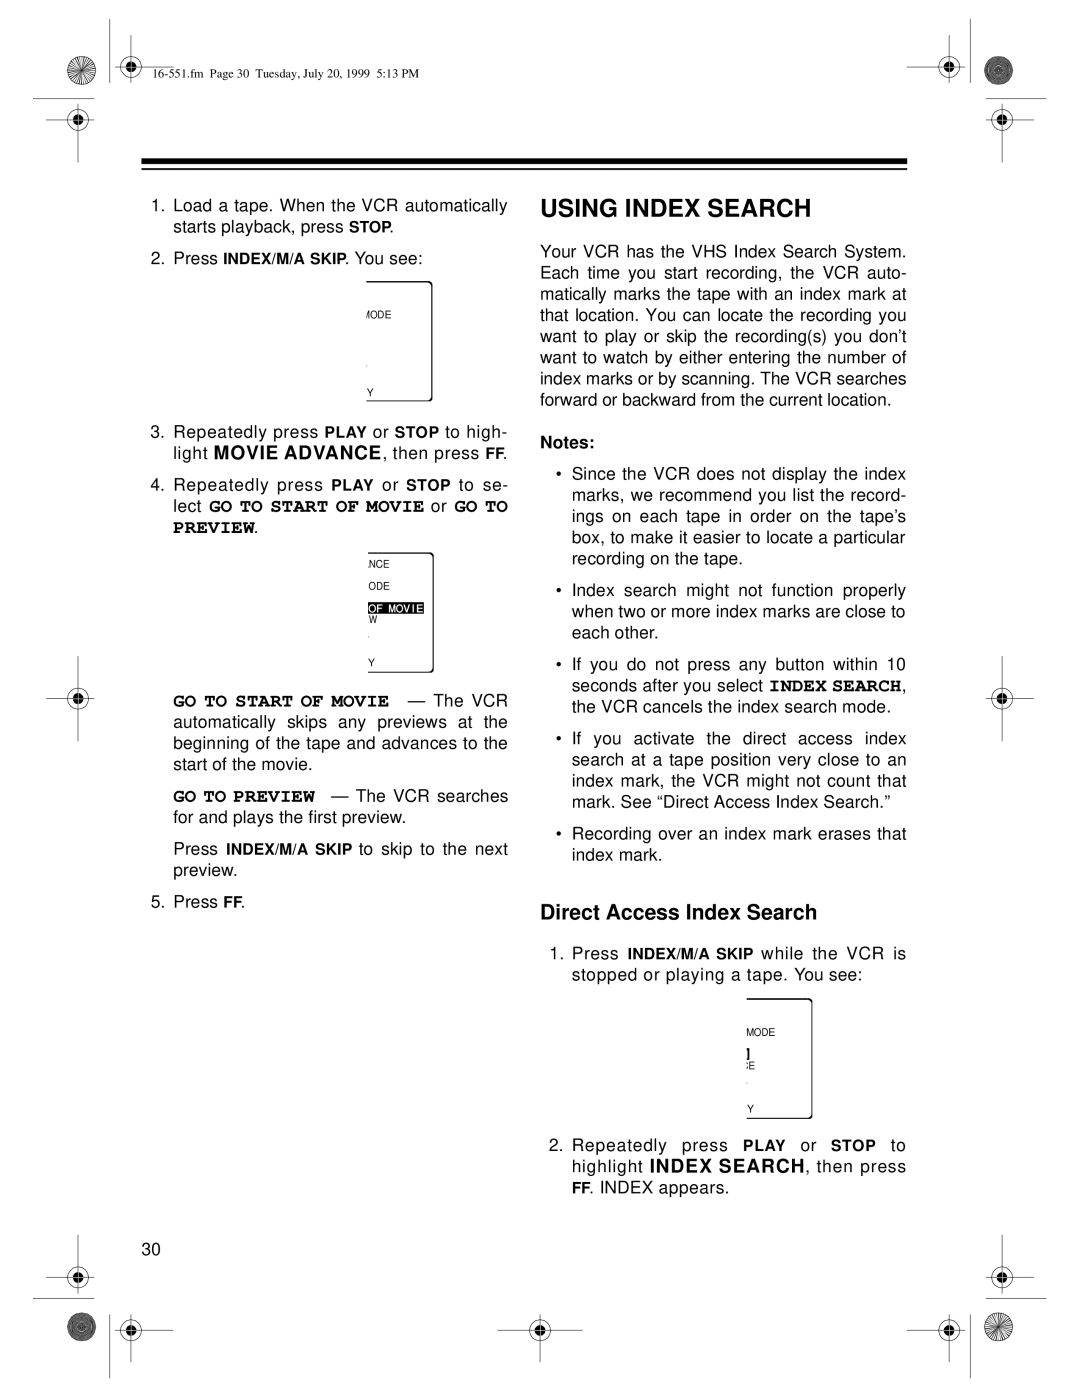 Optimus 63, 114 owner manual Using Index Search, Direct Access Index Search 